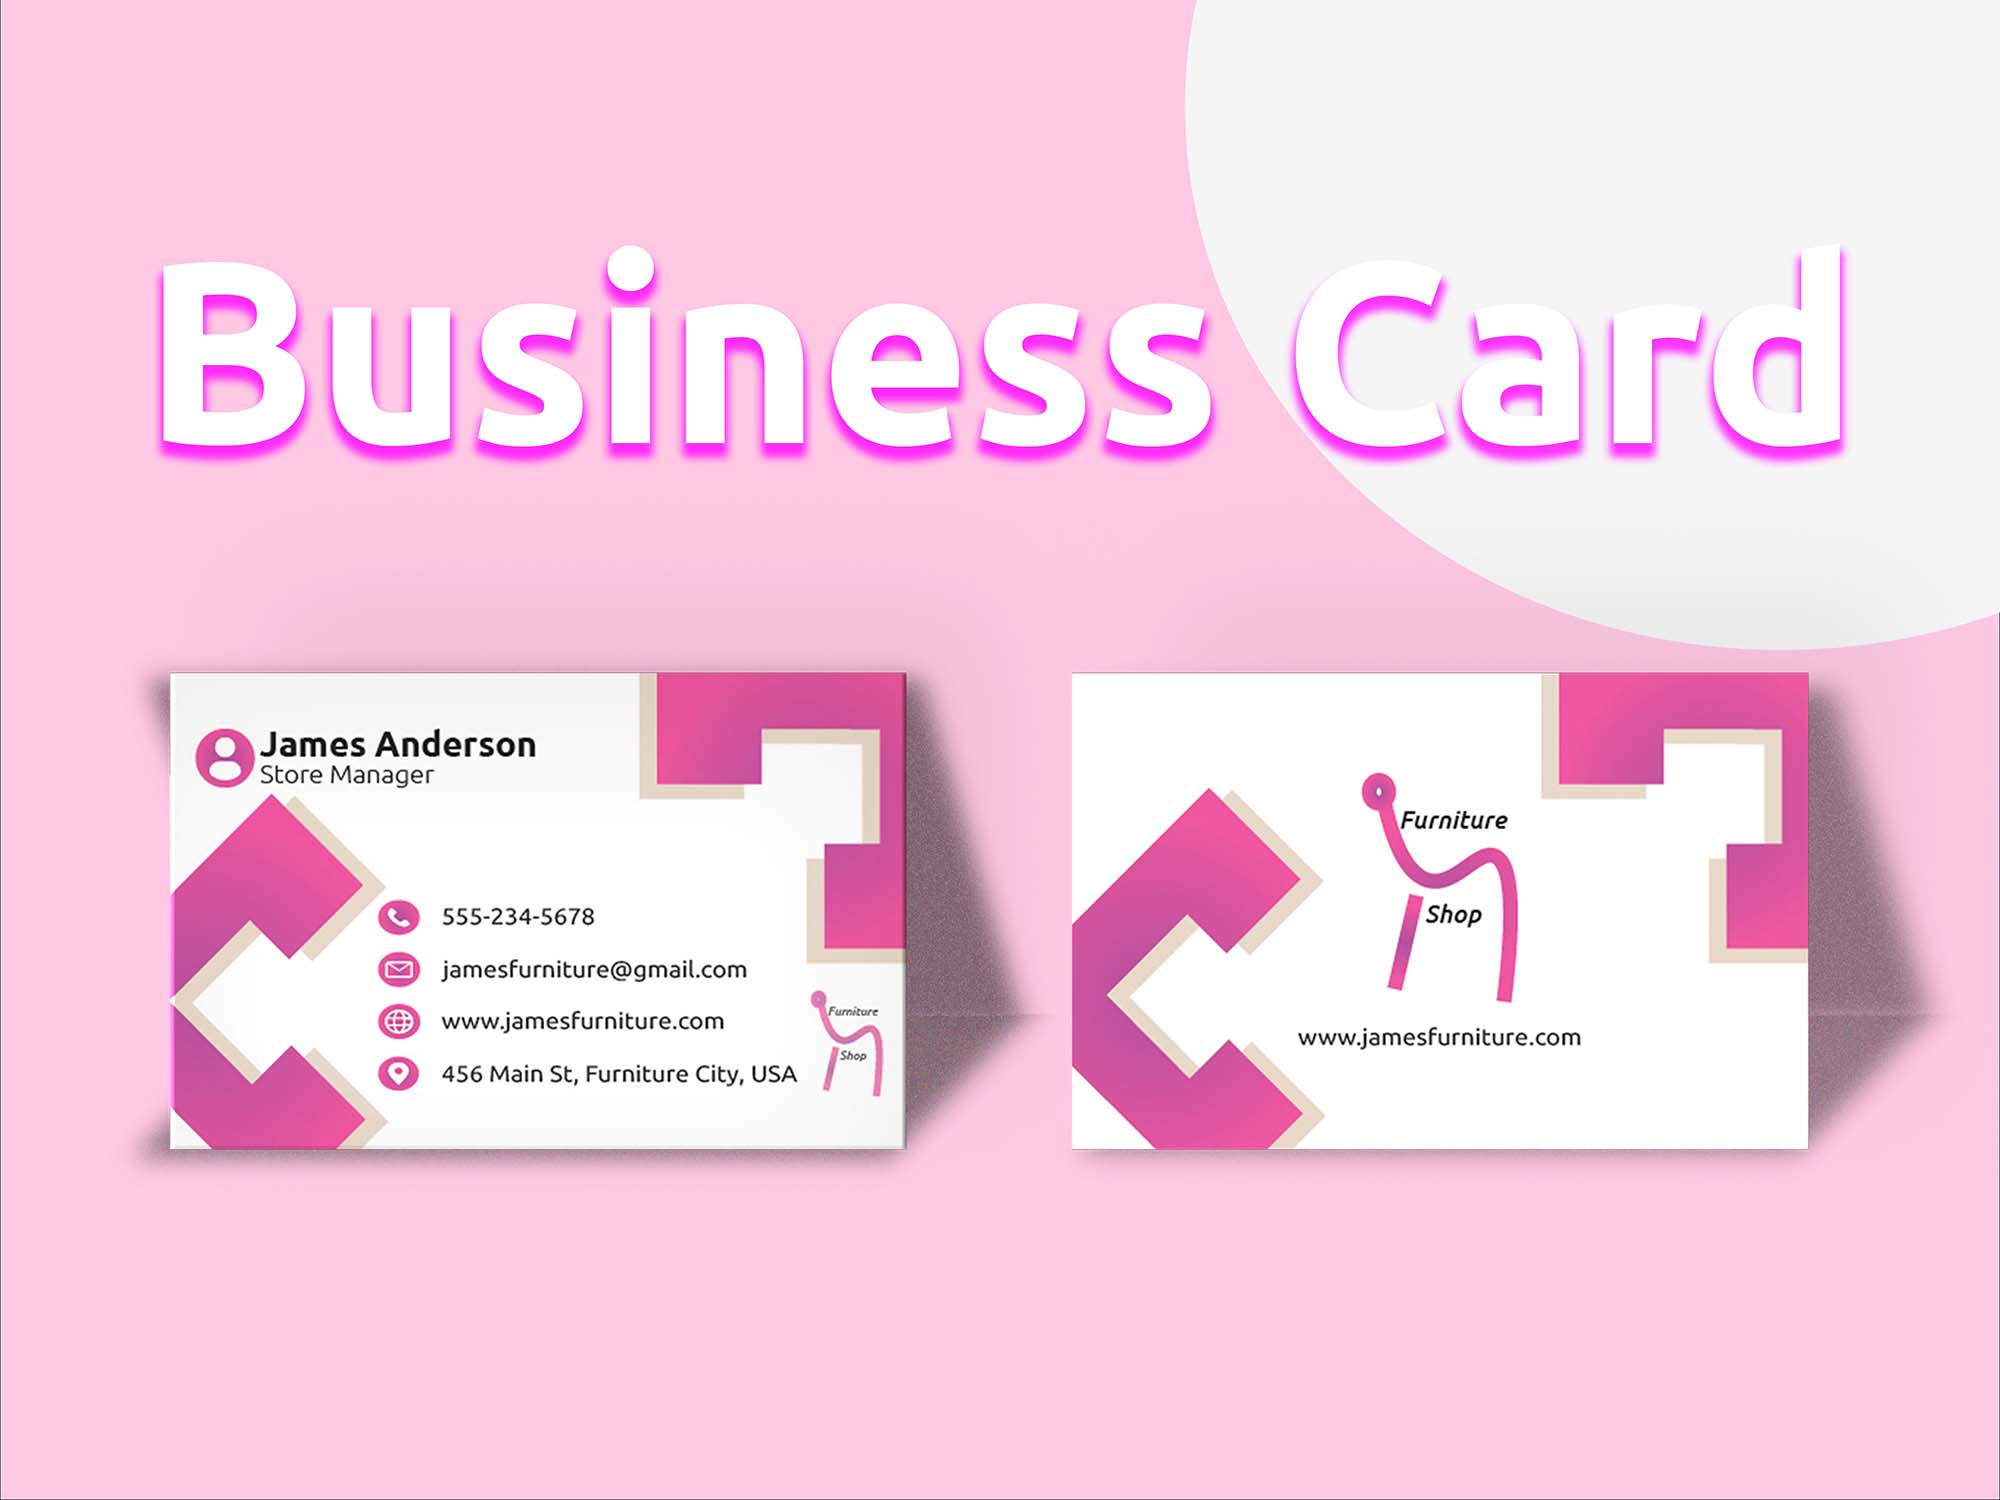 I will design a Professional Business Card